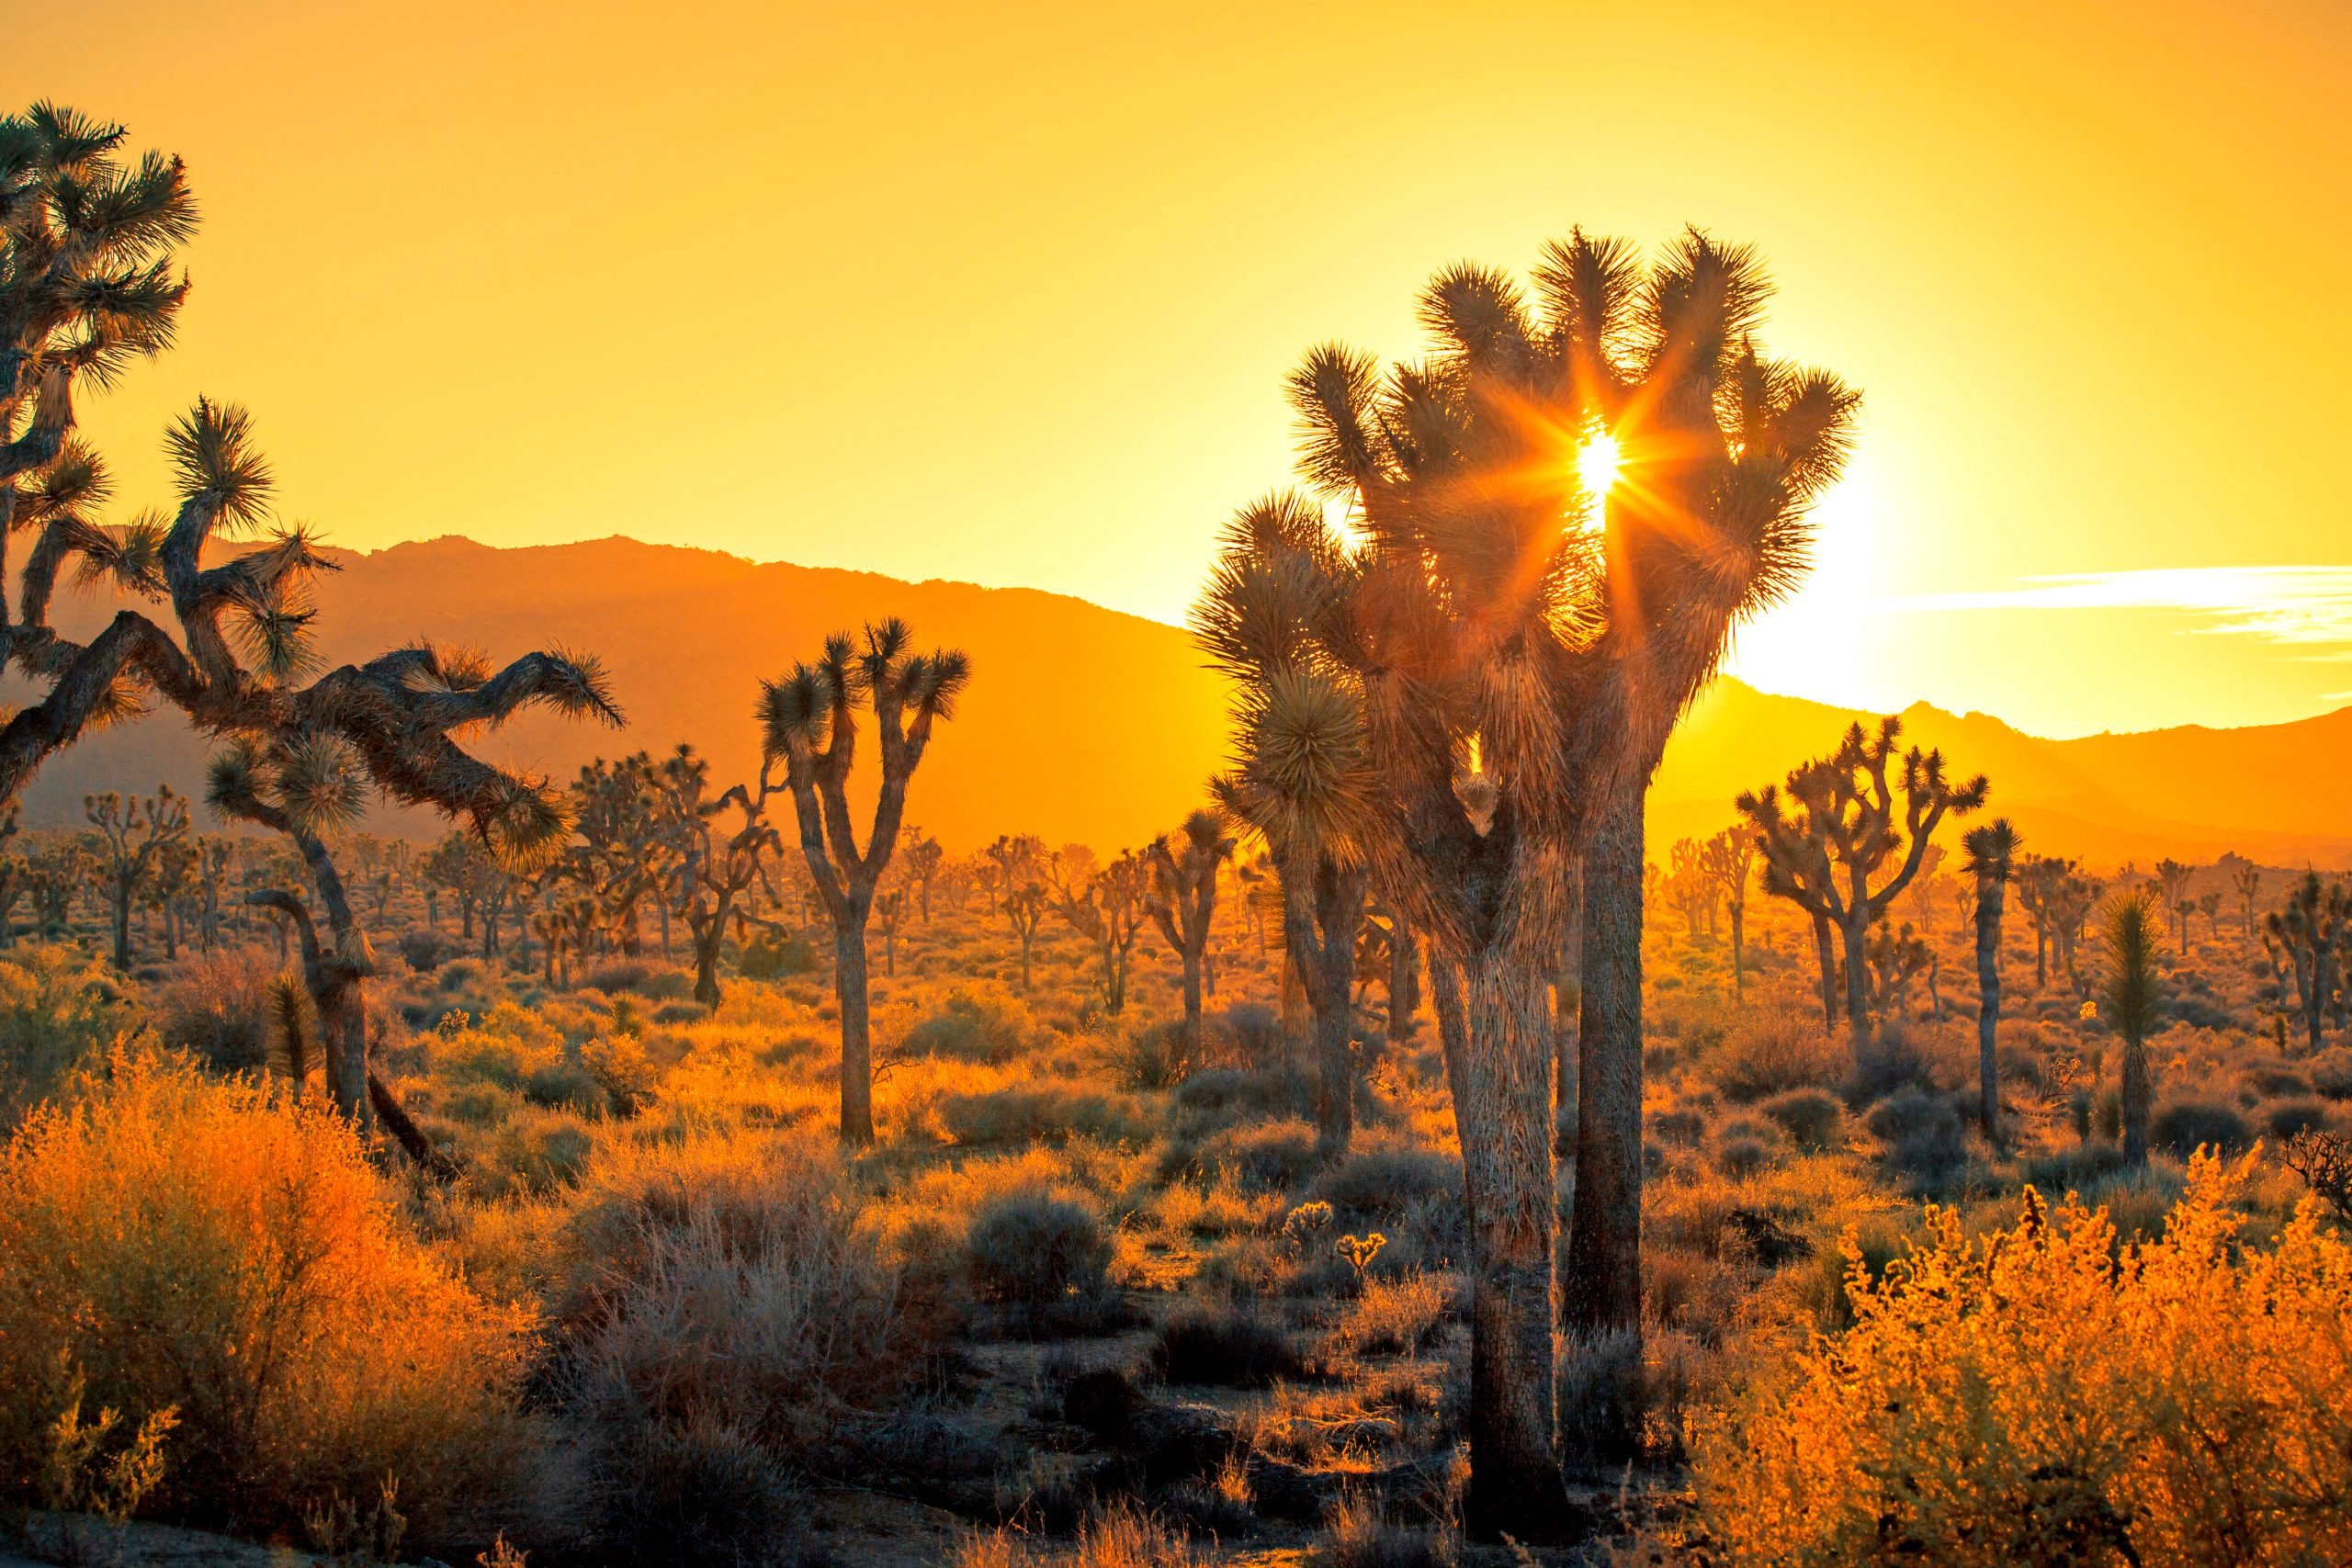 4 Essential Things To Do In Joshua Tree National Park